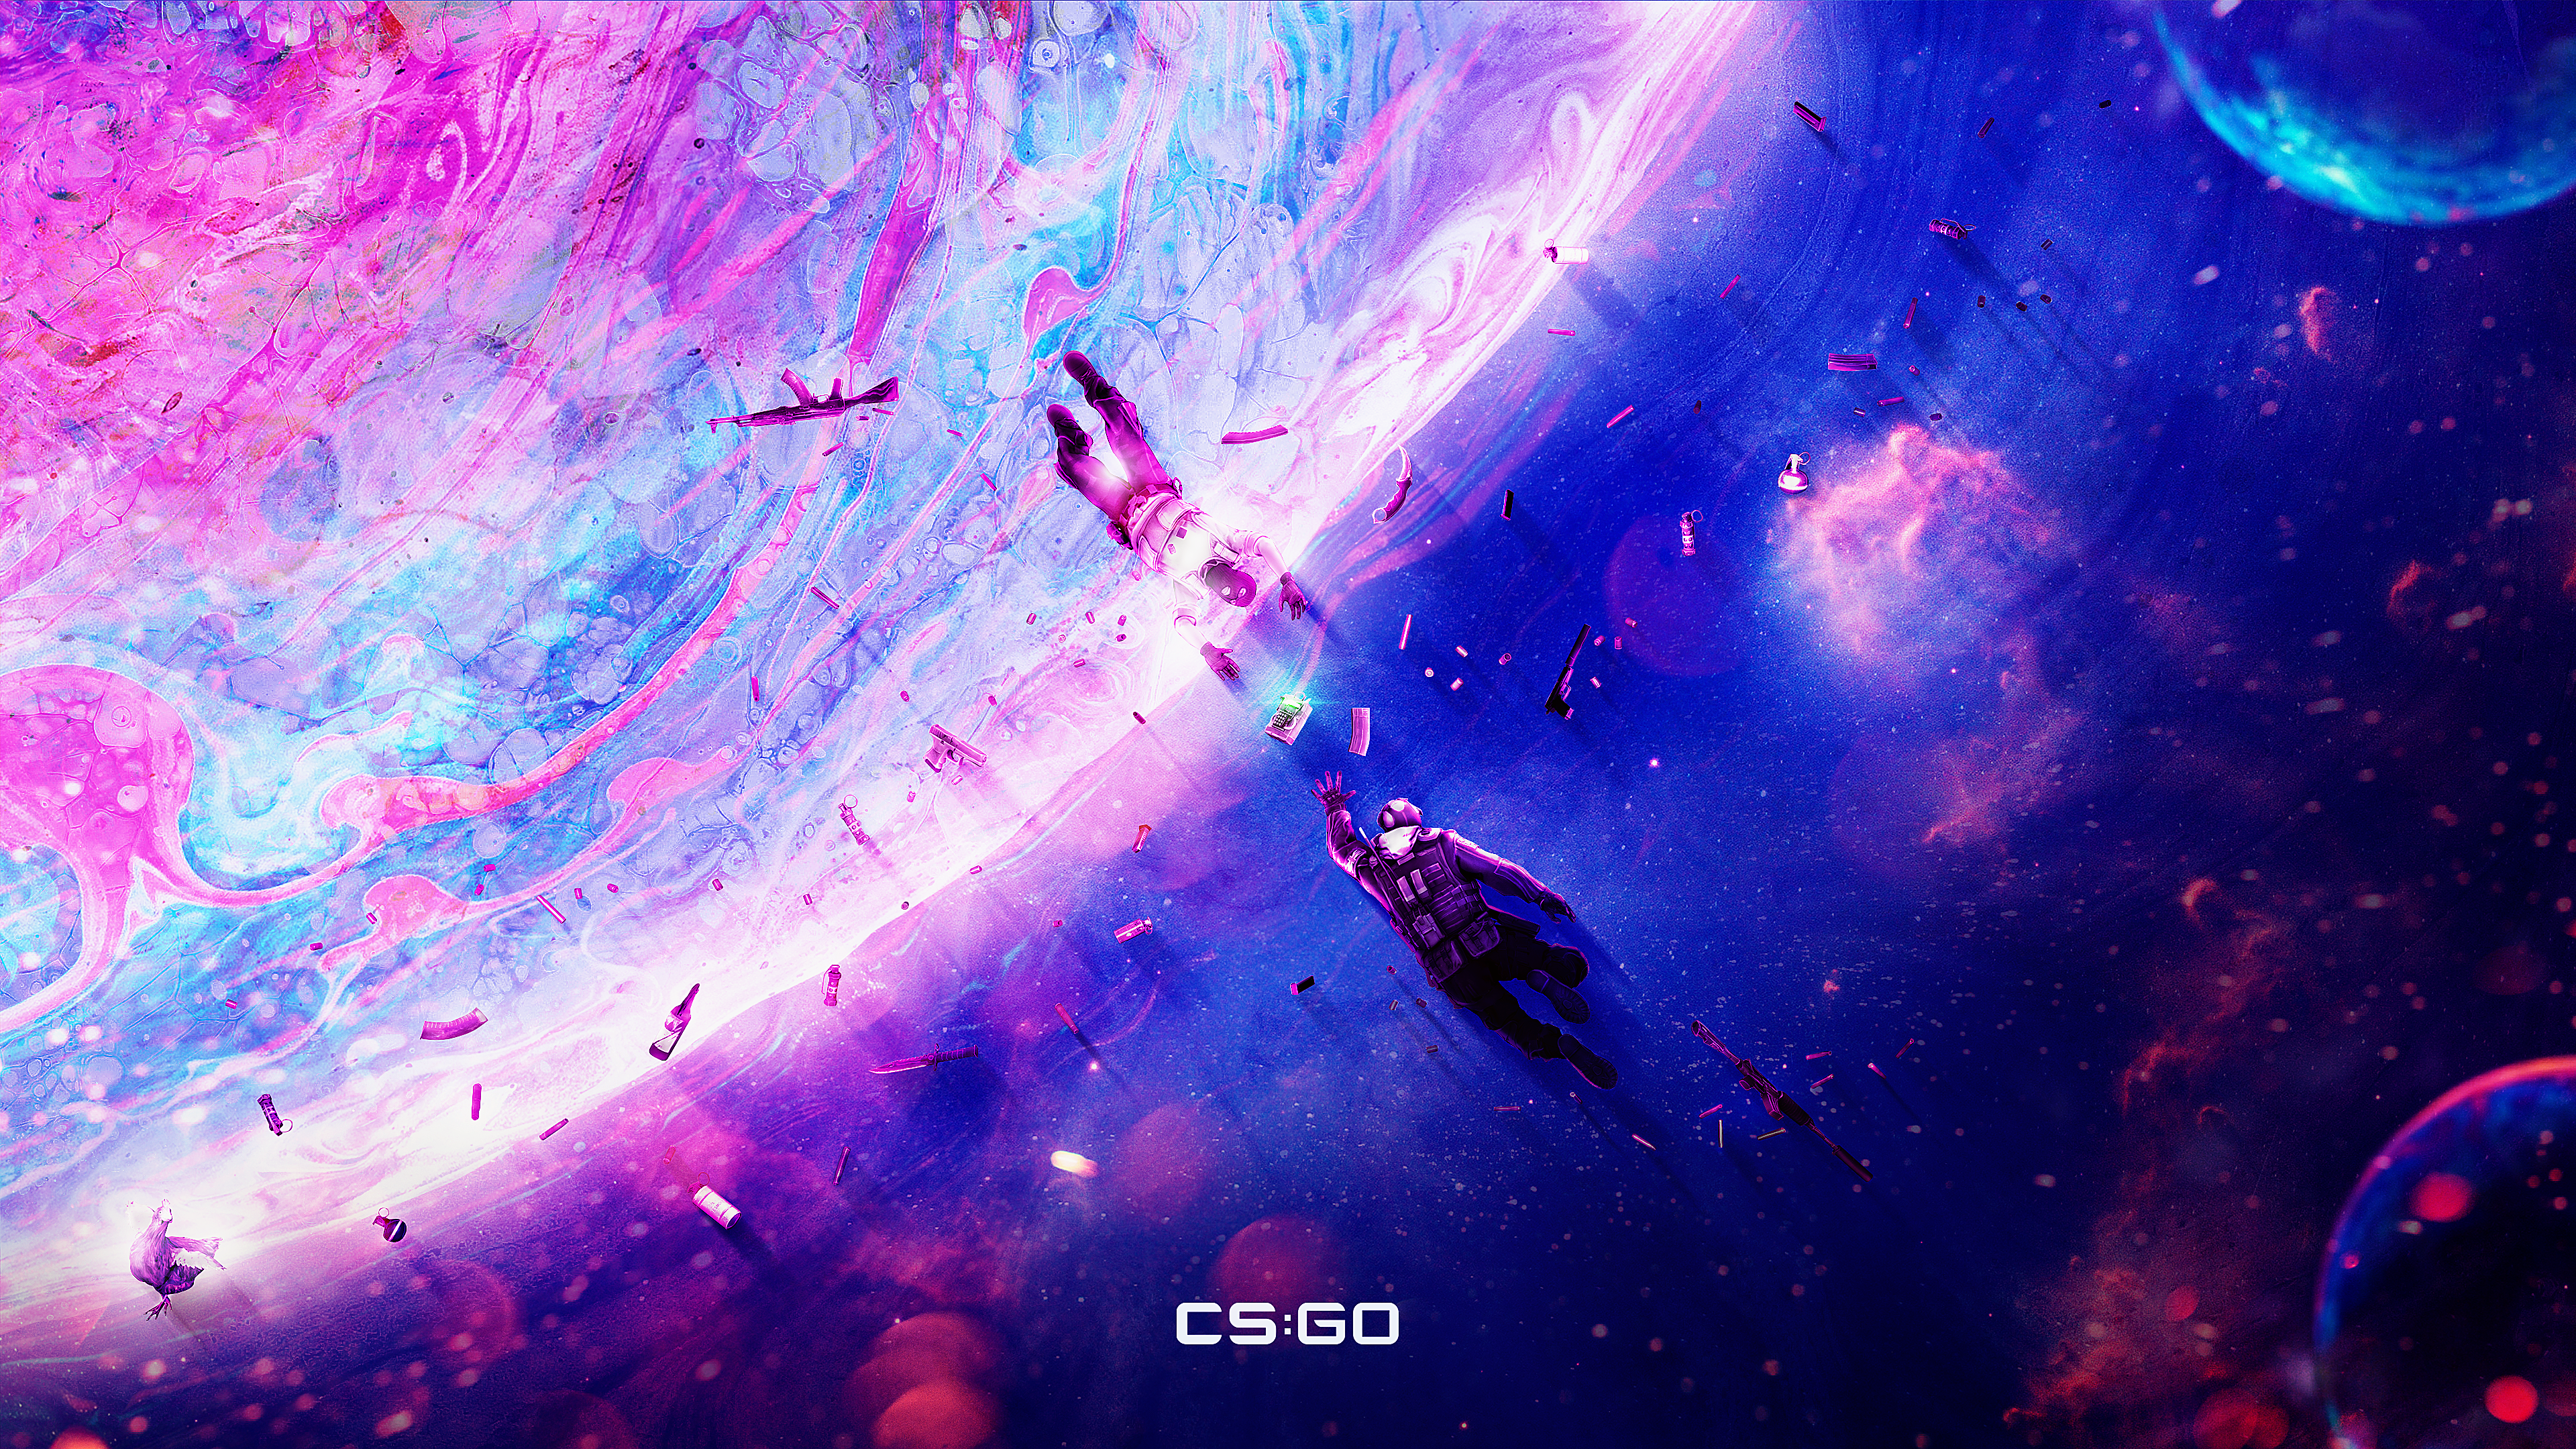 Space CS GO (clear version) 4k Ultra HD Wallpaper. Background